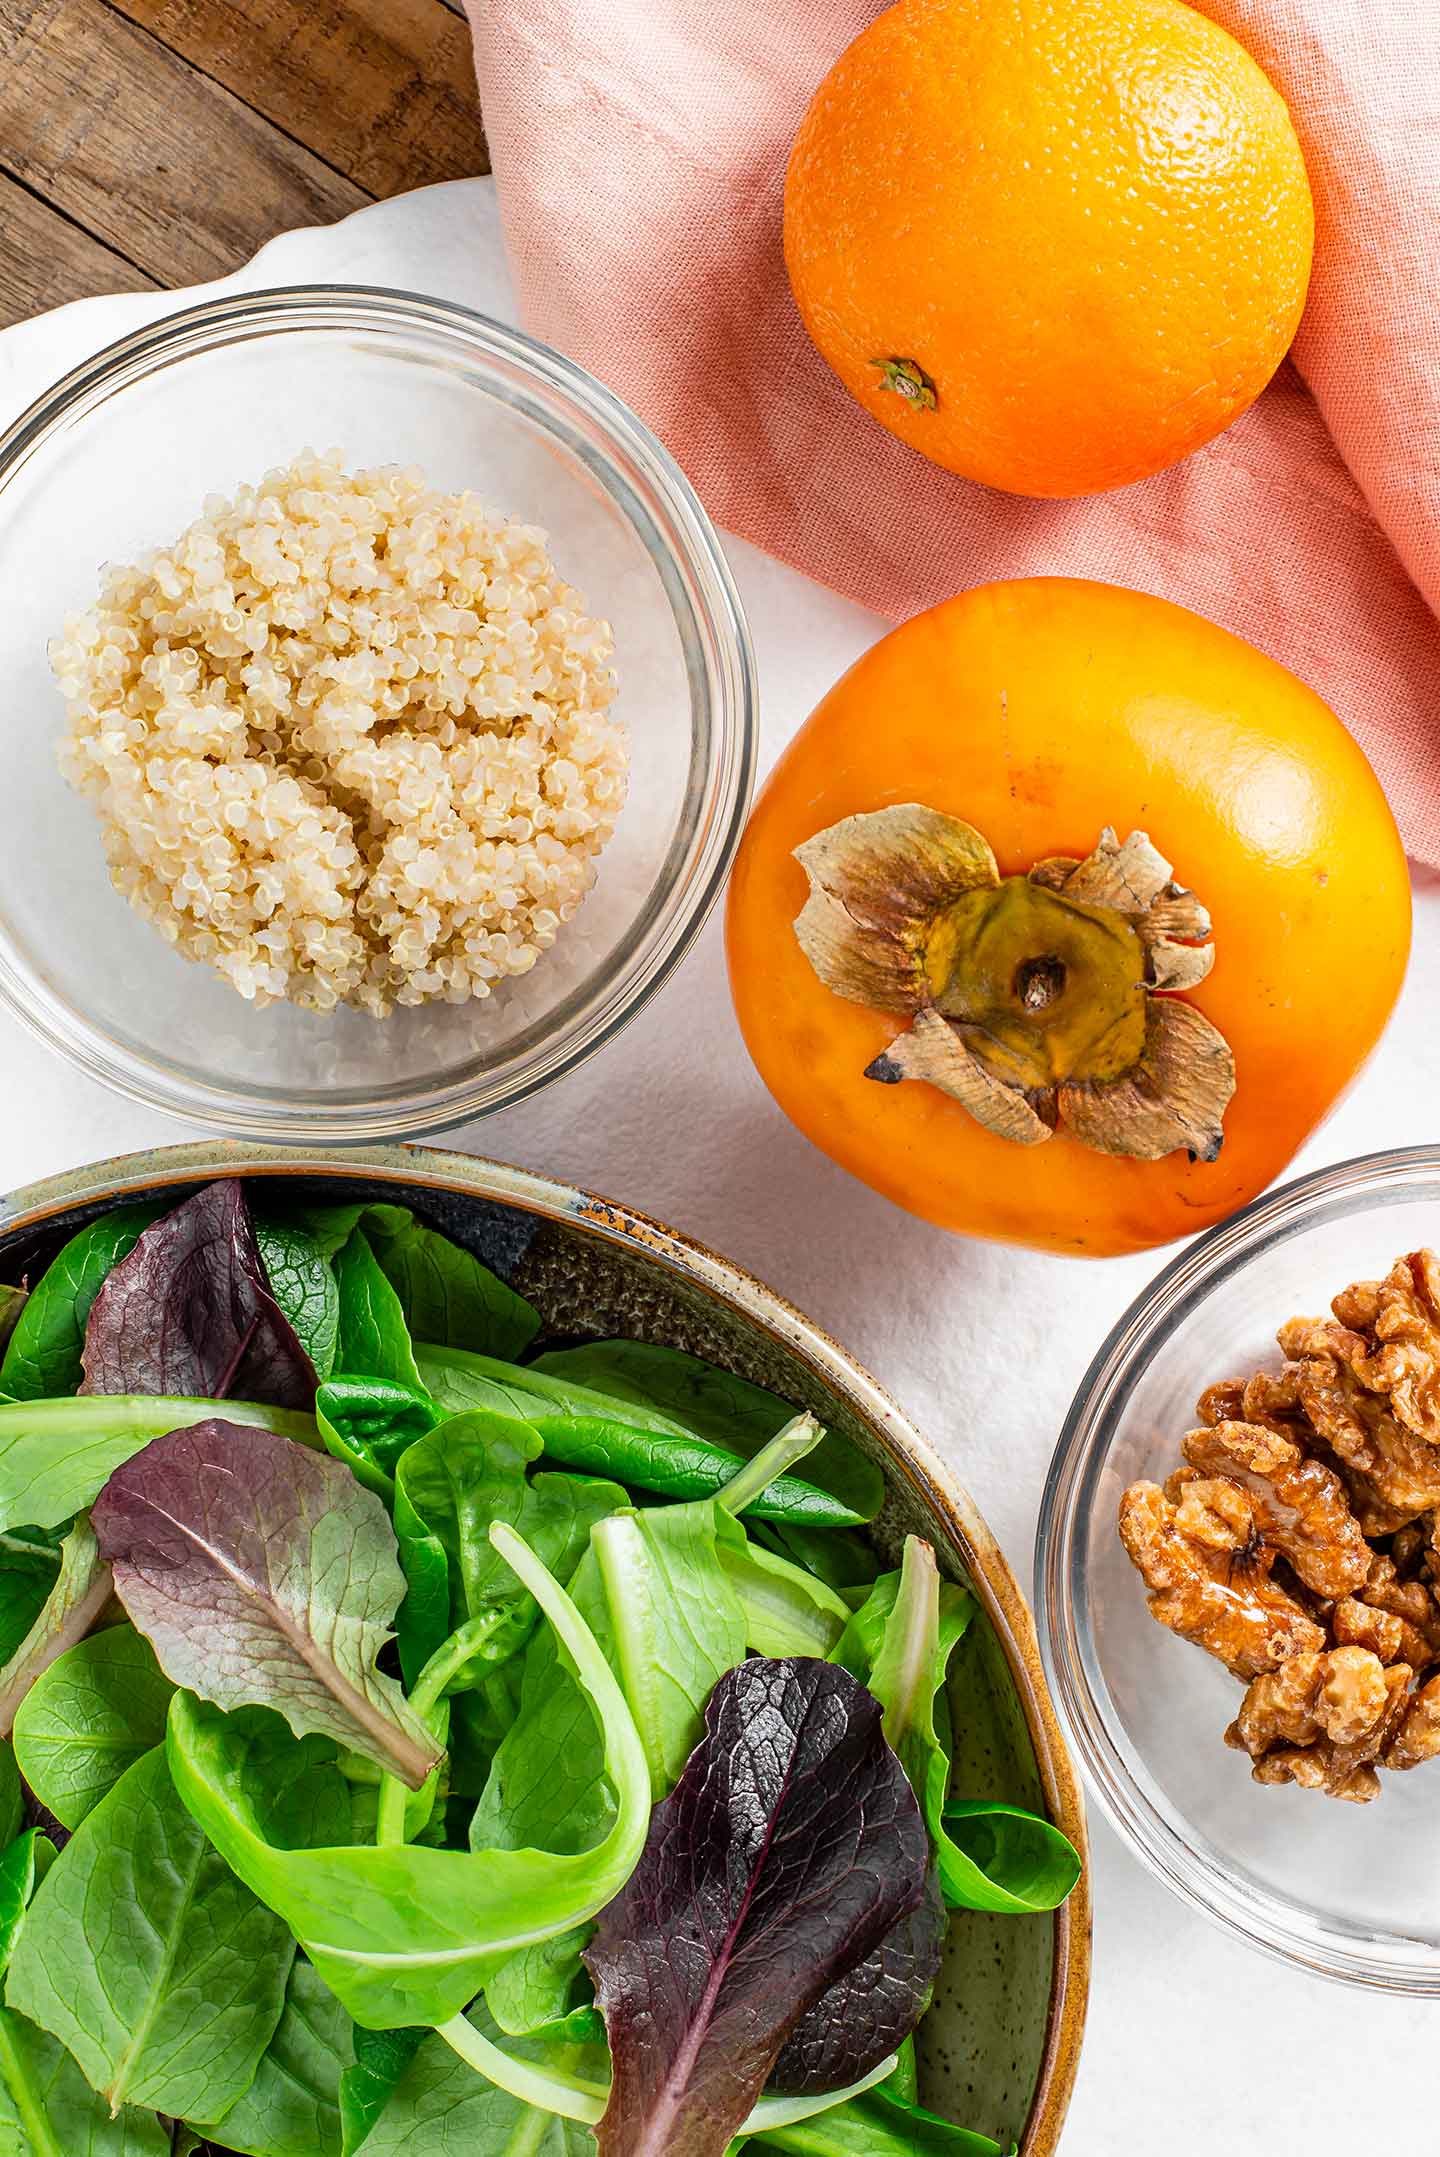 Top down view of a persimmon, an orange, small bowls of golden quinoa and candied walnuts, and a larger bowl of mixed greens.